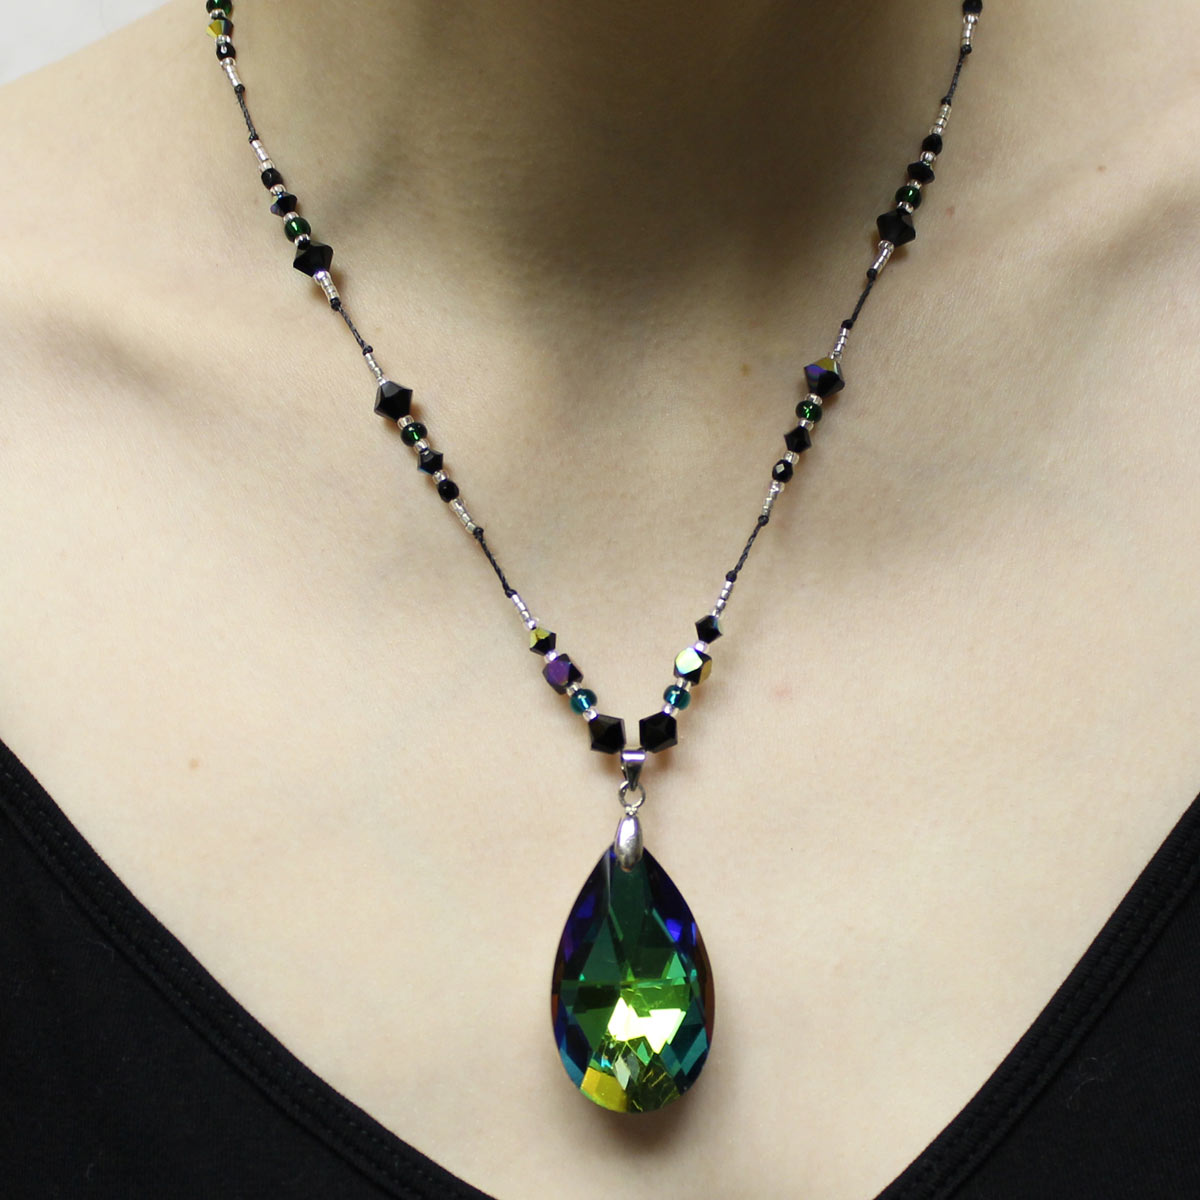 statement necklace, iridescent beads, crystal necklace, prism necklace